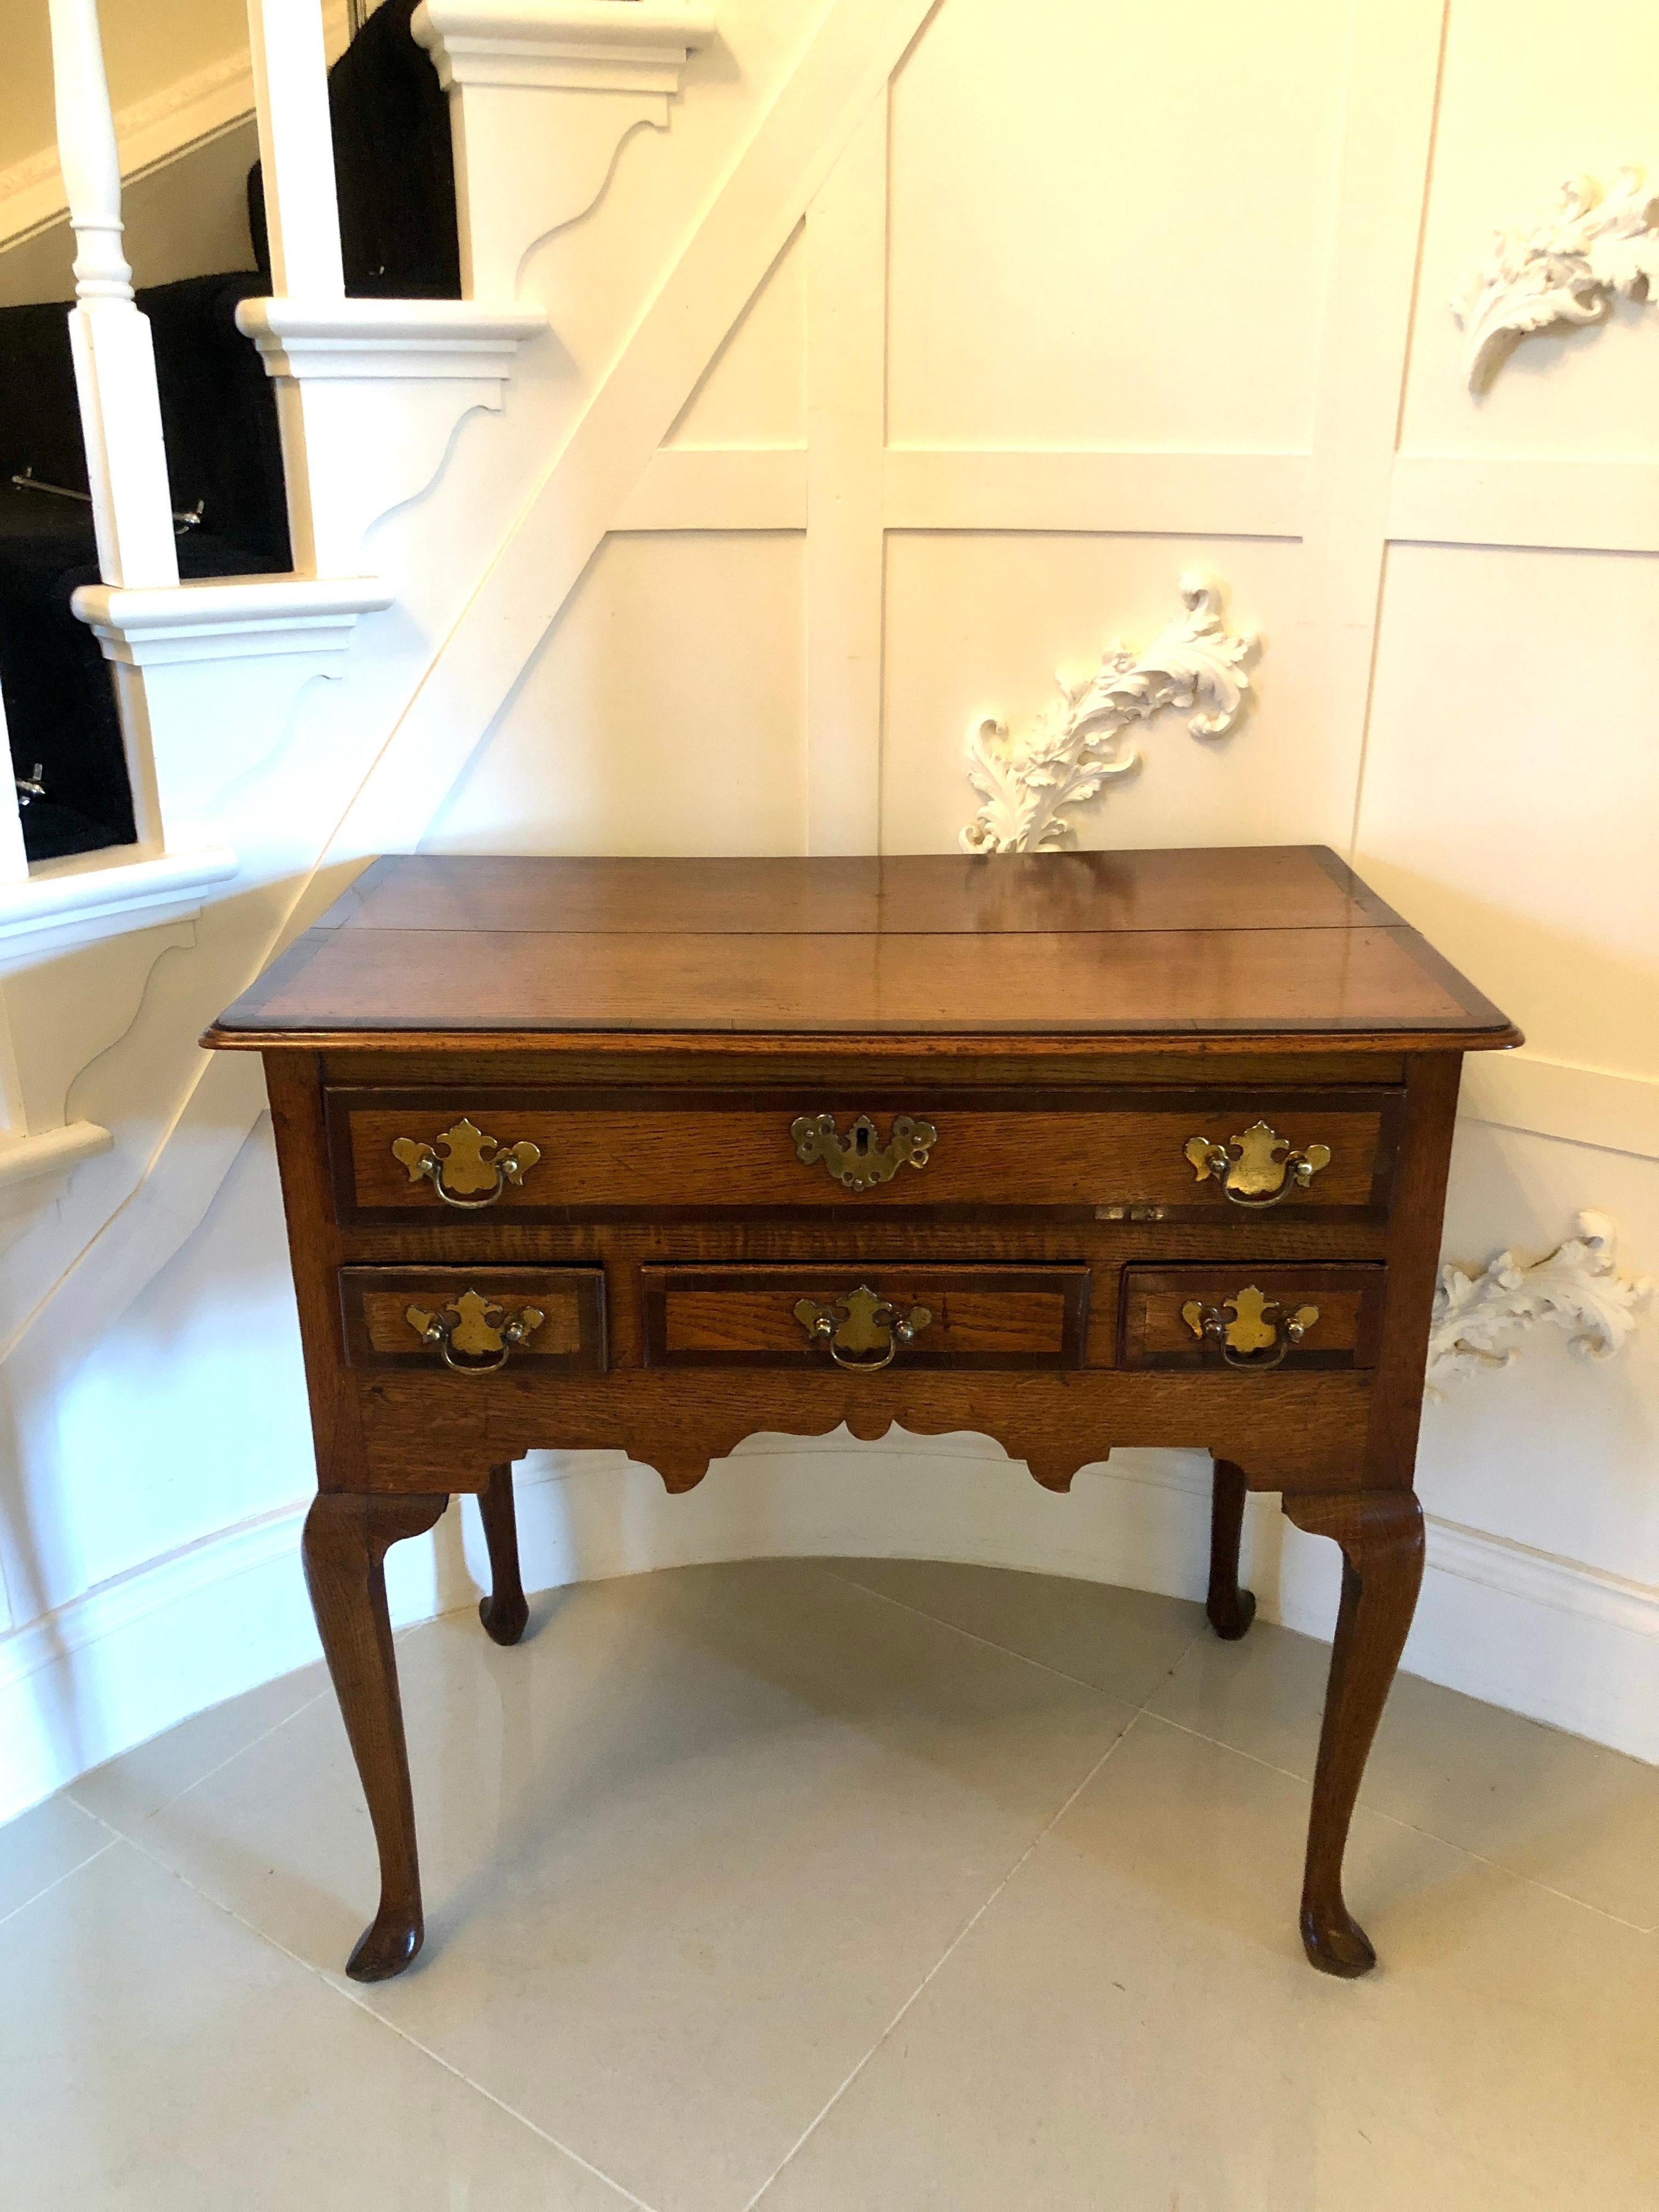 Antique George III oak lowboy

Antique George III oak lowboy having an oak top crossbanded in mahogany with a moulded edge. This handsome piece boasts one long drawer and three small drawers all crossbanded in mahogany with the original brass